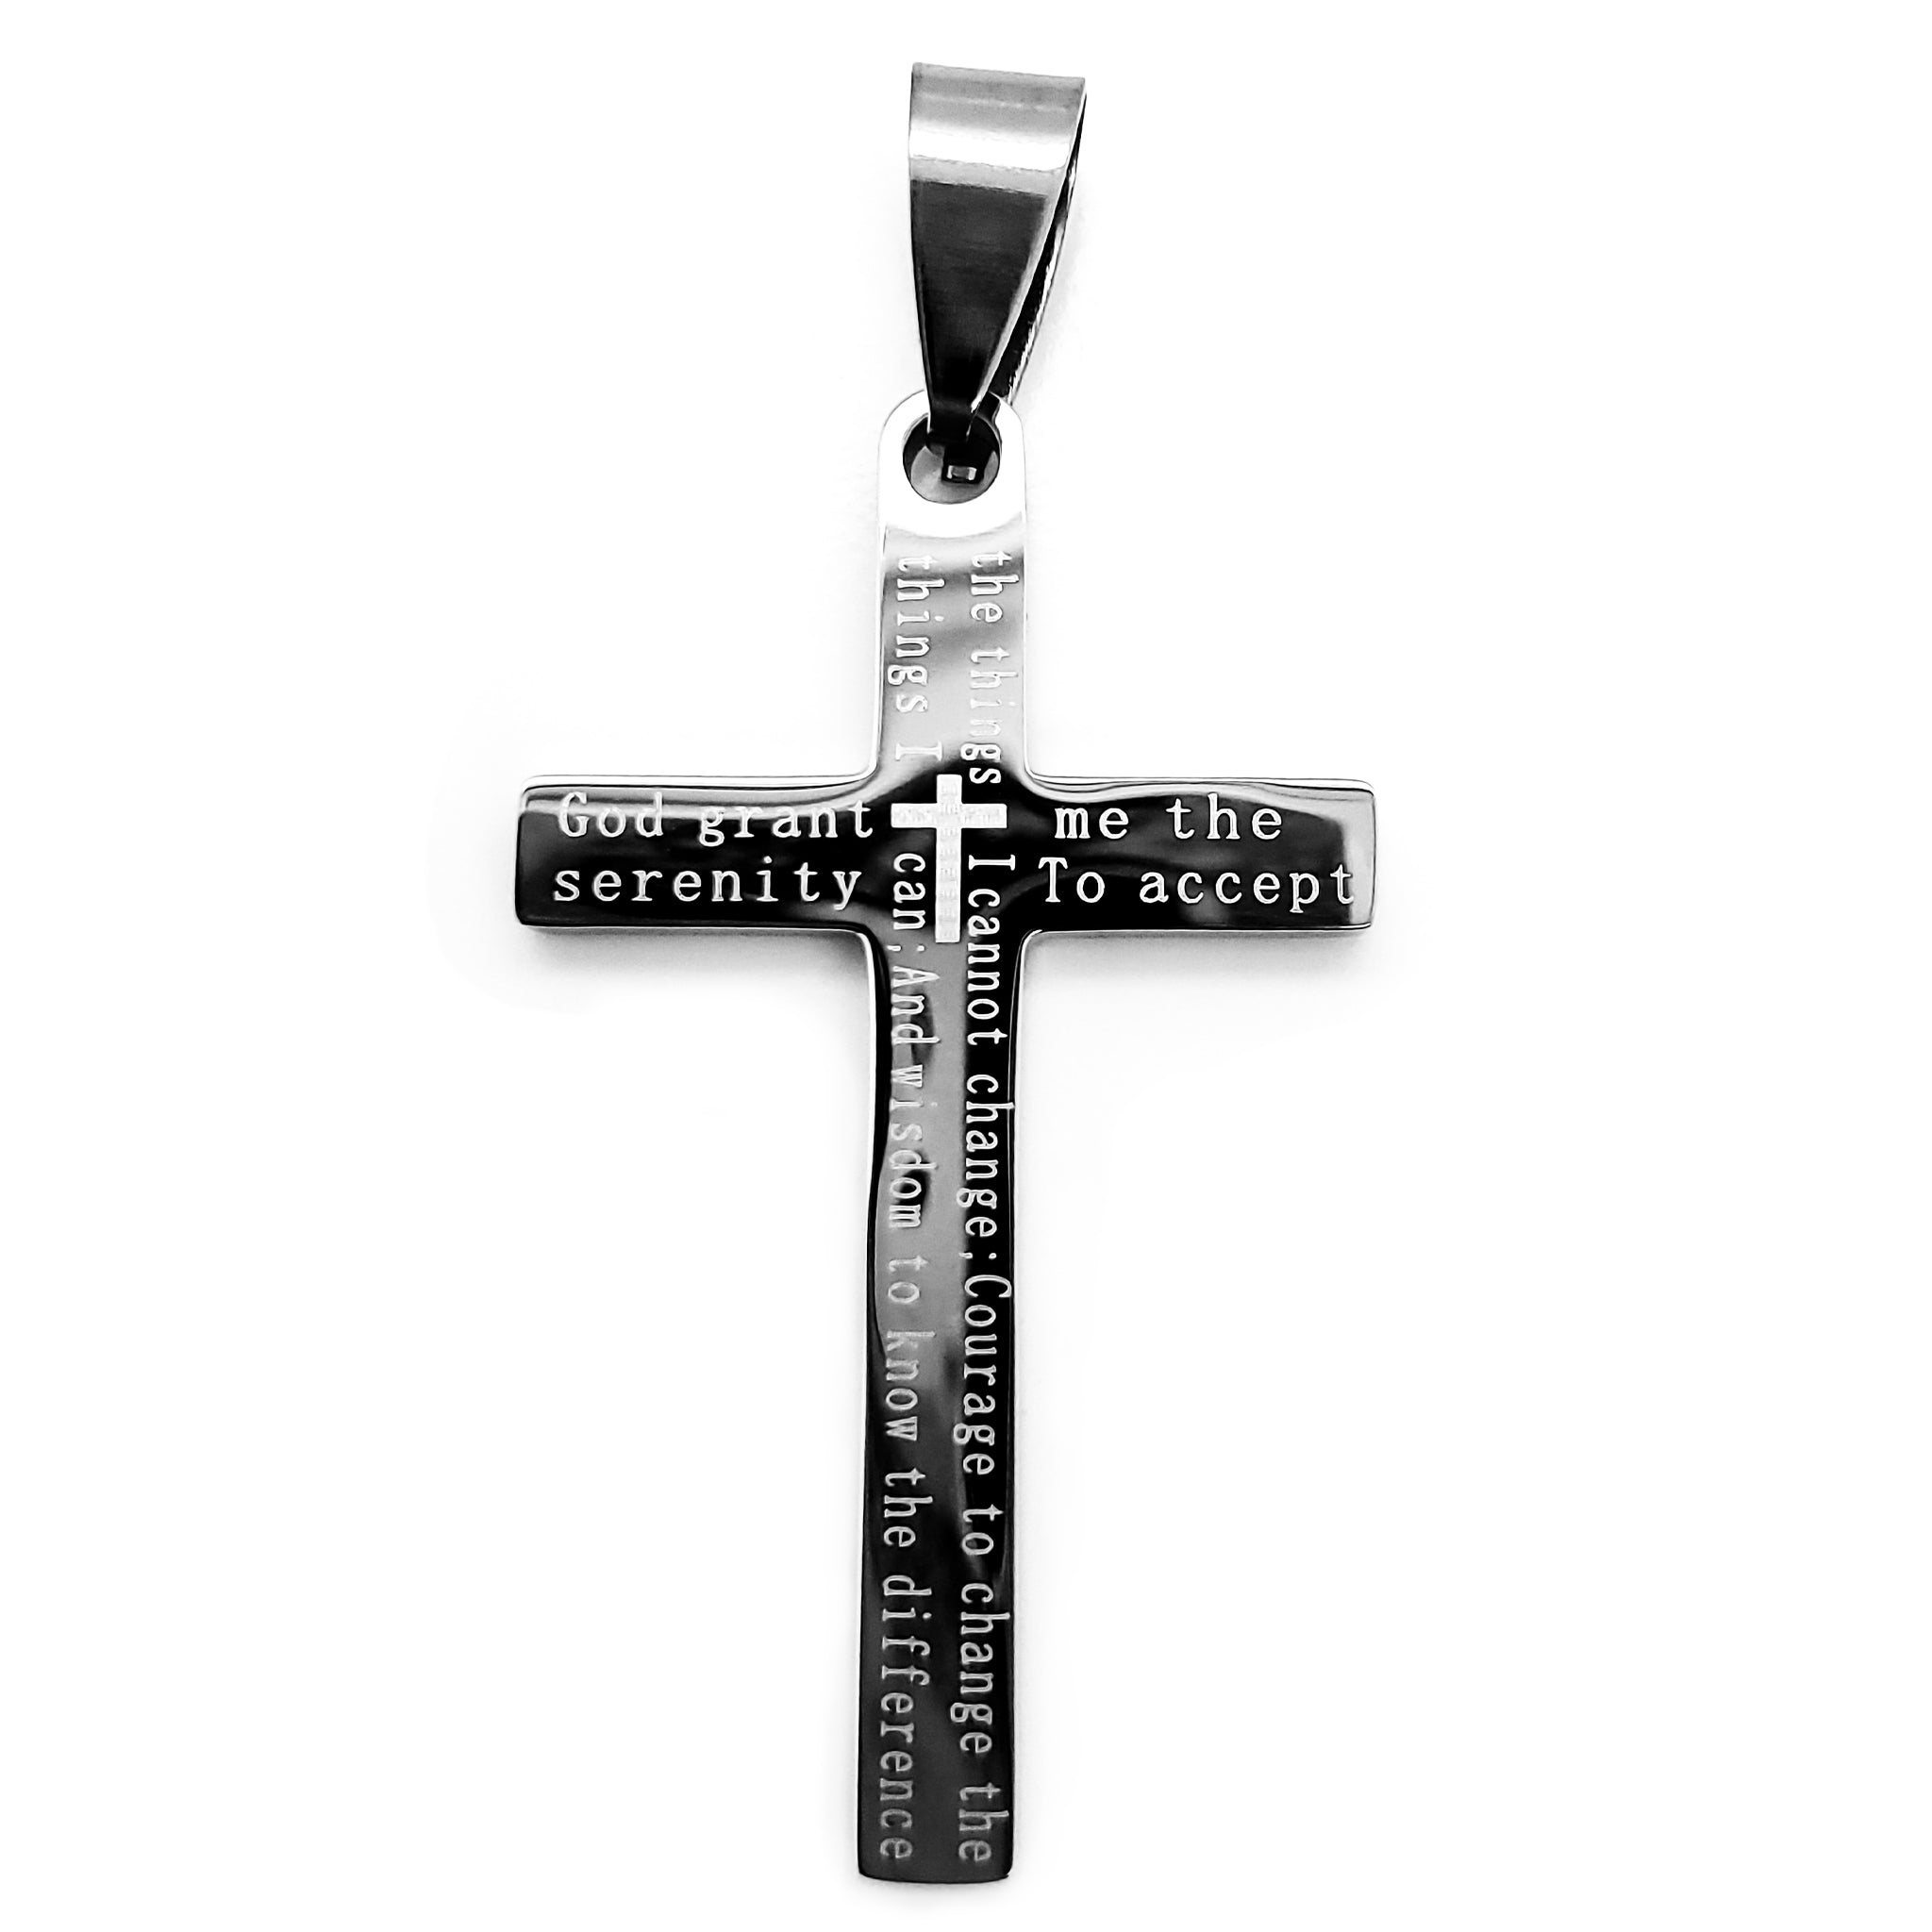 Serenity Prayer Cross Stainless Steel Pendant / PDJ0014-stainless steel jewelry- how to clean stainless steel jewelry- stainless steel jewelry wholesale- mens stainless steel jewelry- 316l stainless steel jewelry